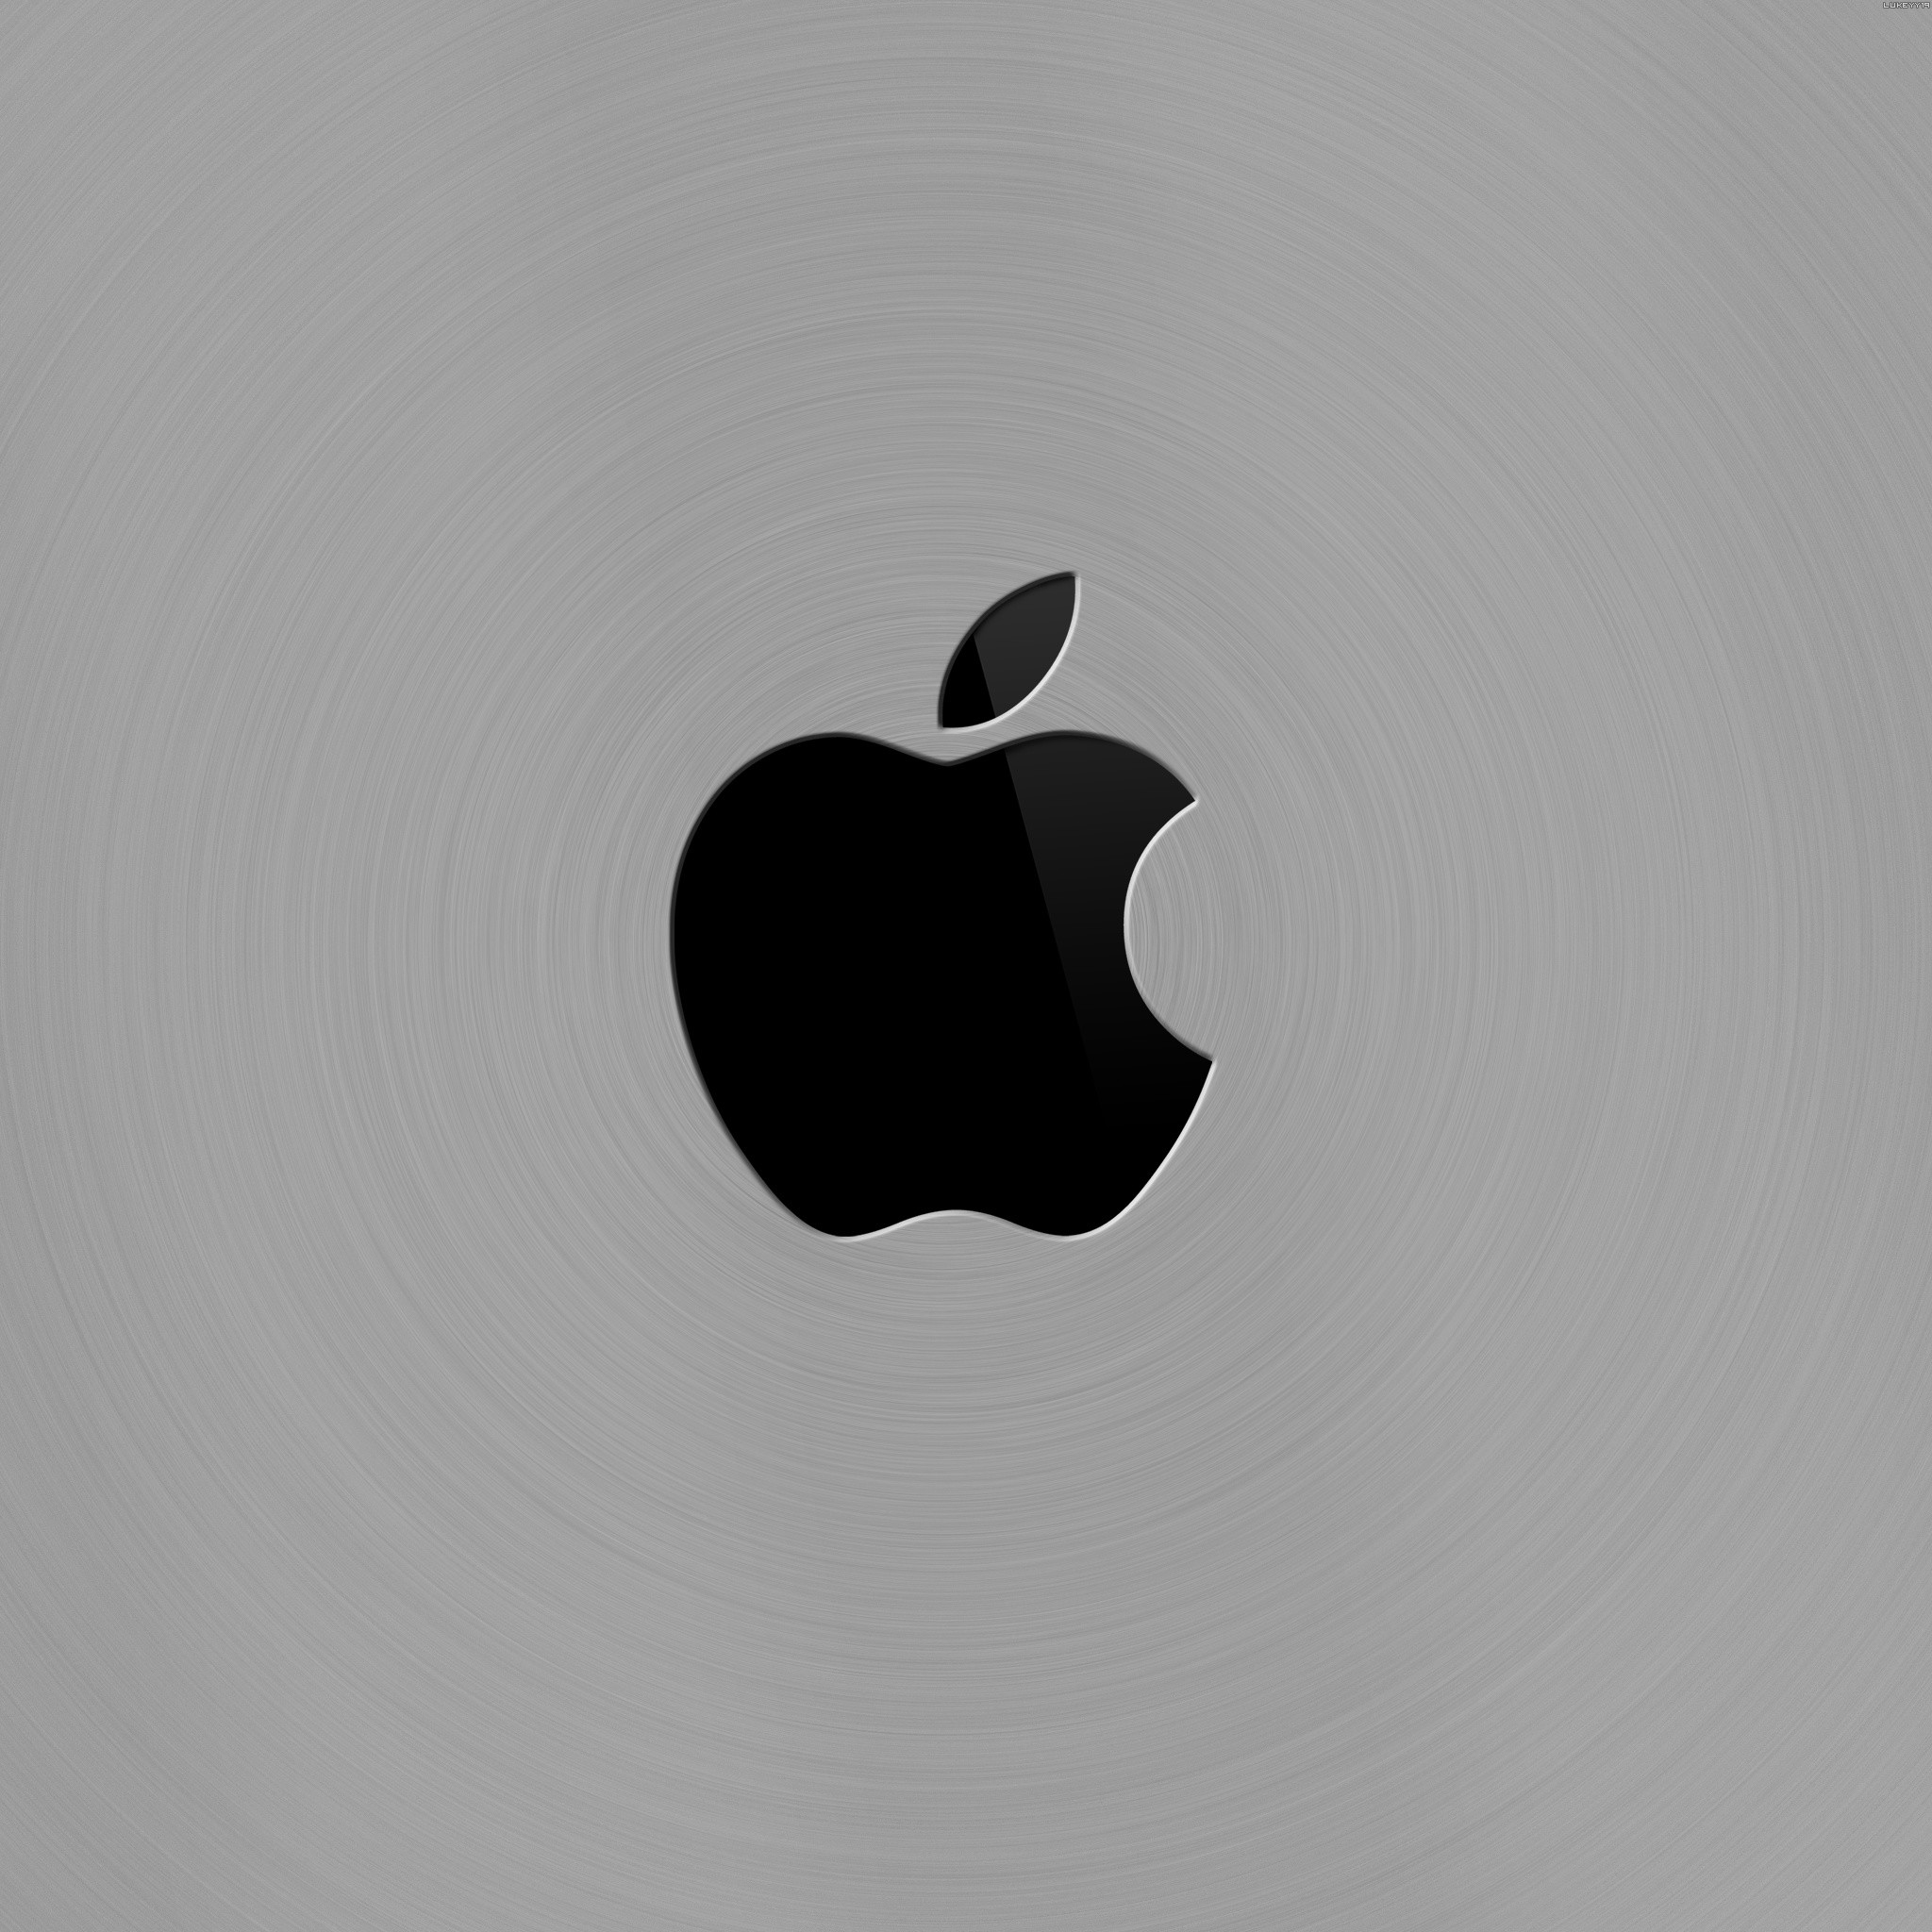 2048x2048 Search Results for “ipad wallpaper apple logo hd” – Adorable Wallpapers